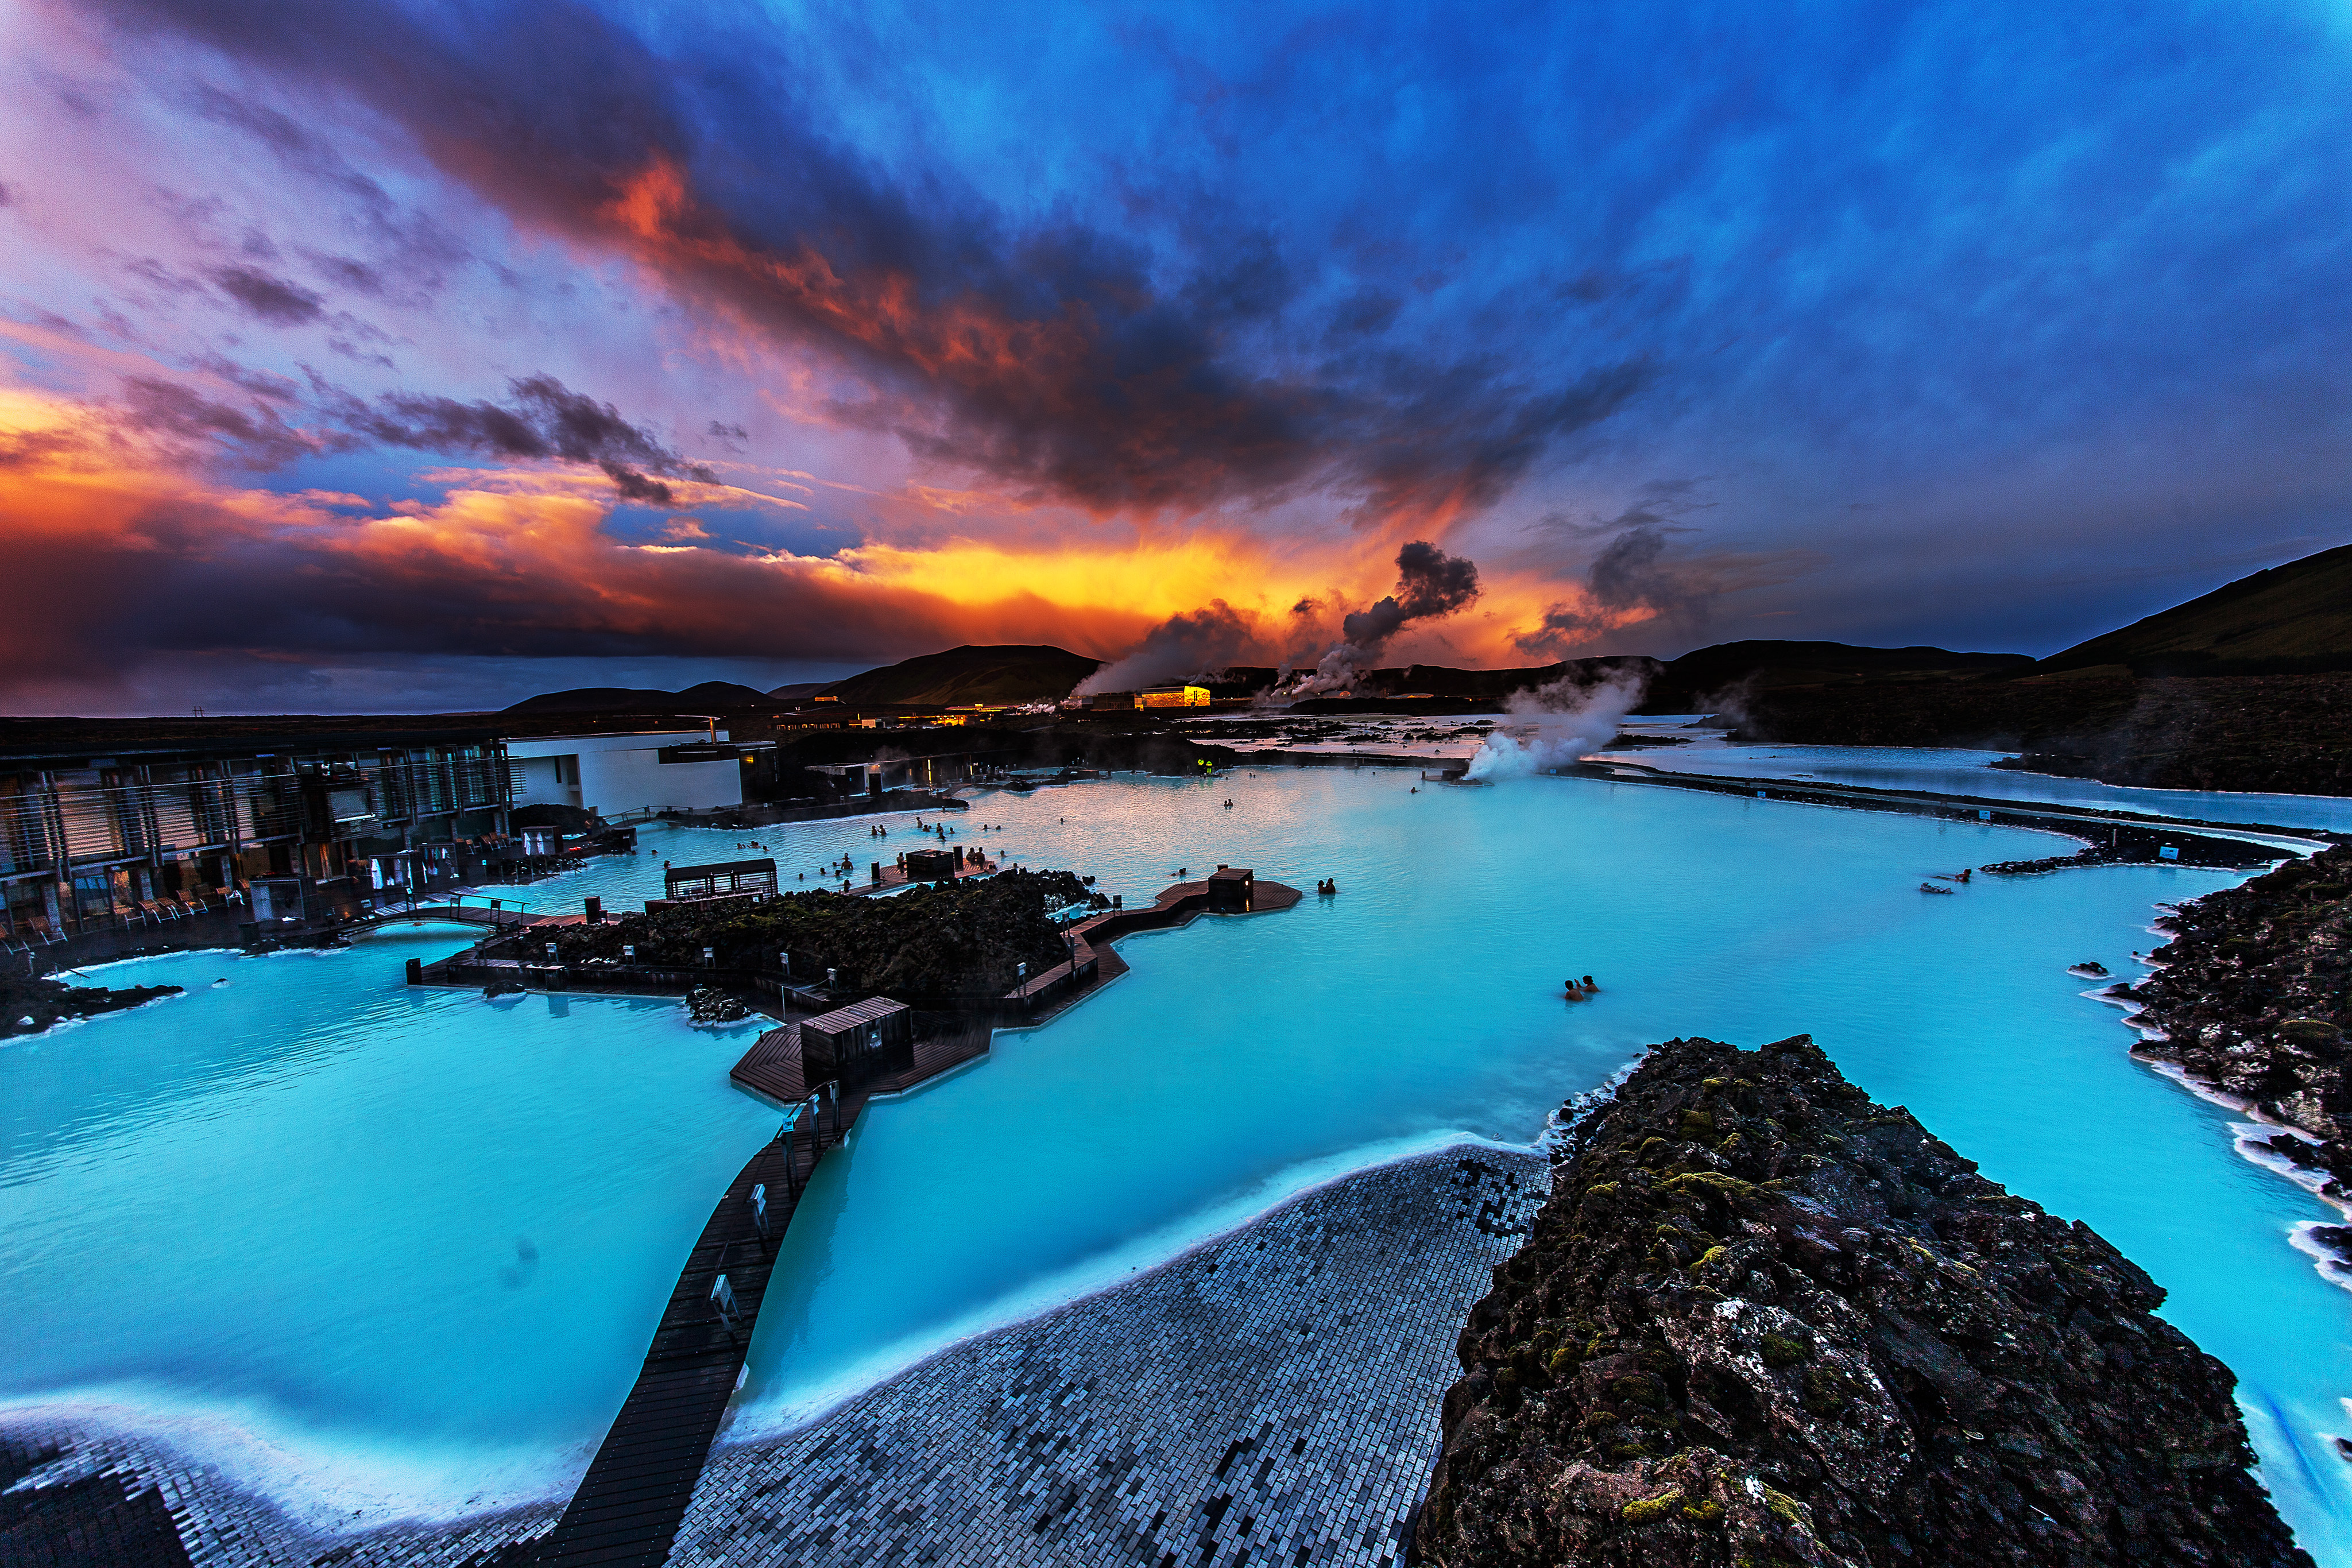 The Blue Lagoon geothermal spa lives up to its name, boasting beautiful azure waters.